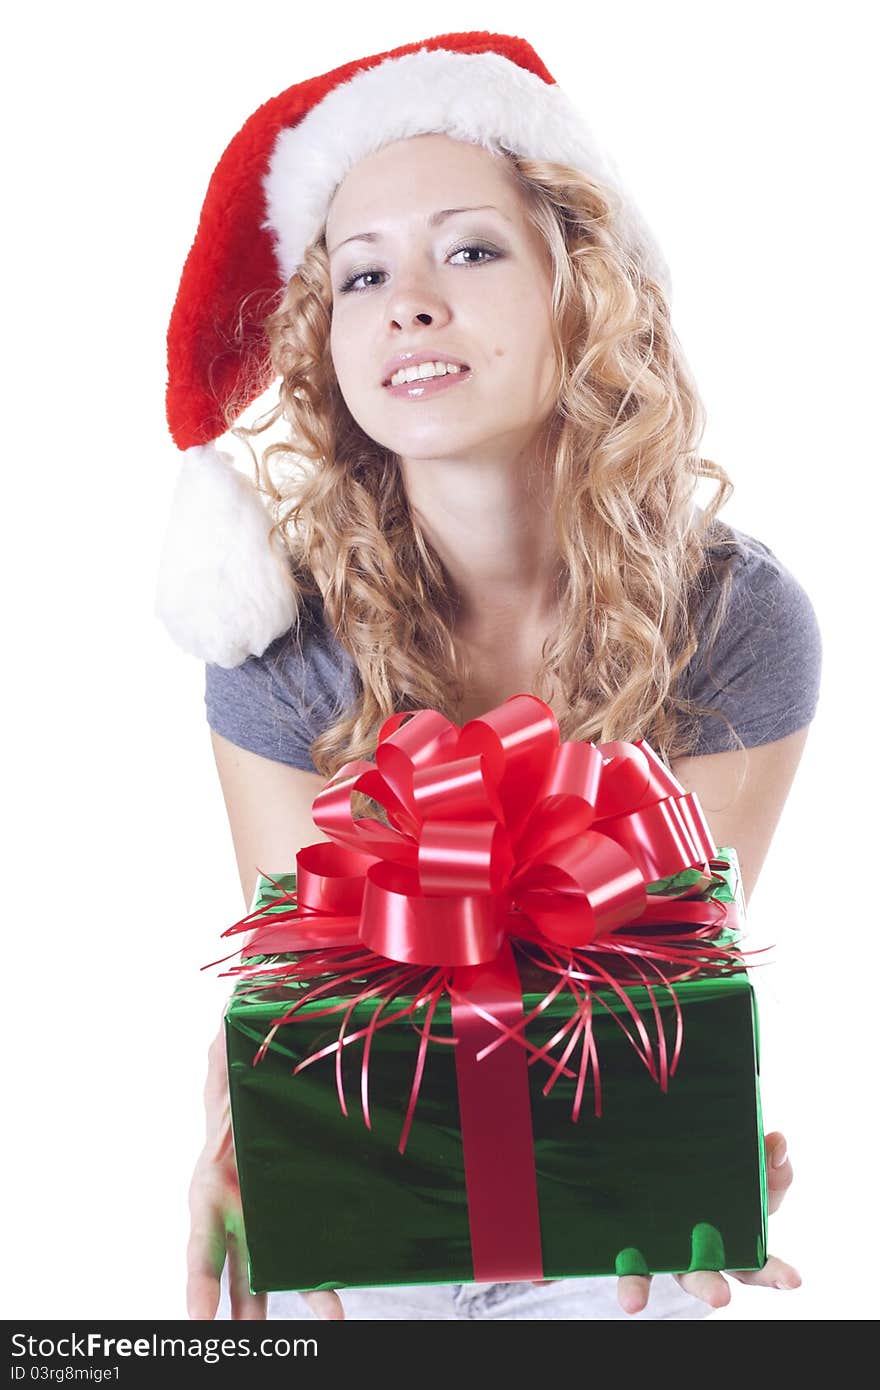 Pretty blond Santa girl with a present gift for New Year